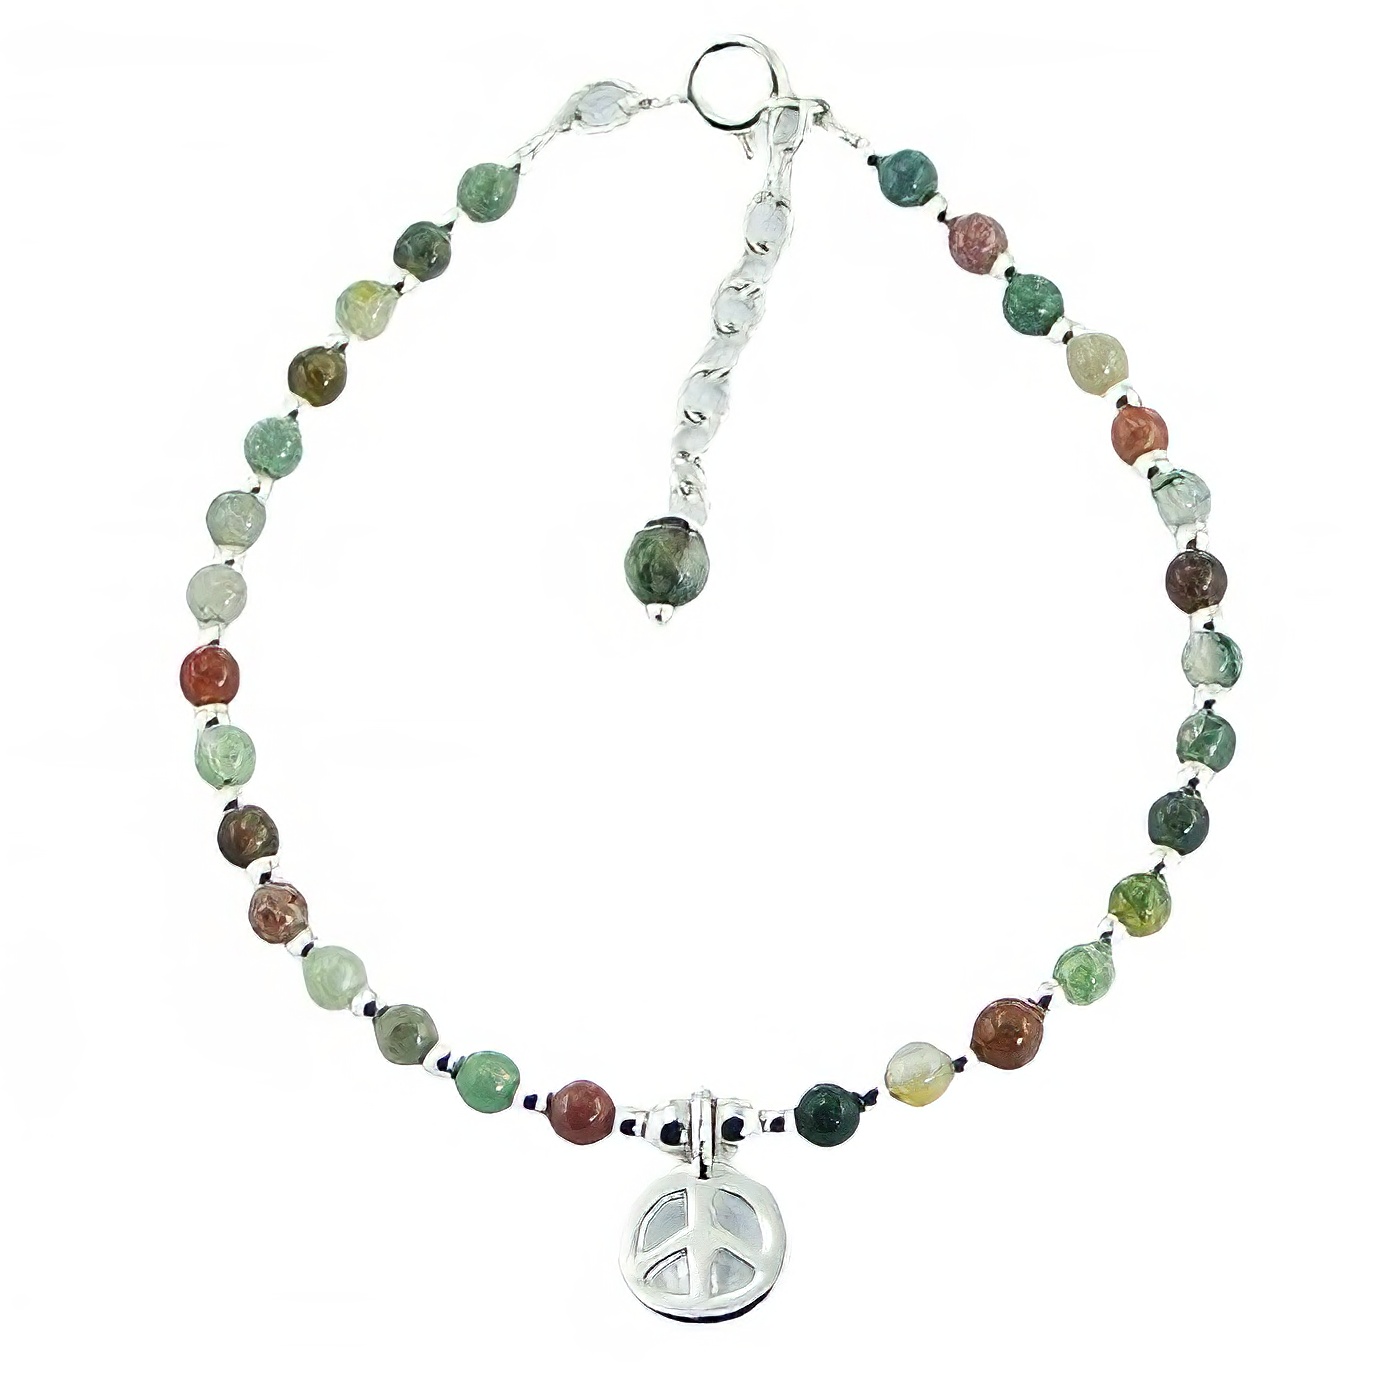 Multicolored Round Agate Bead Bracelet with Silver Peace Charm by BeYindi 